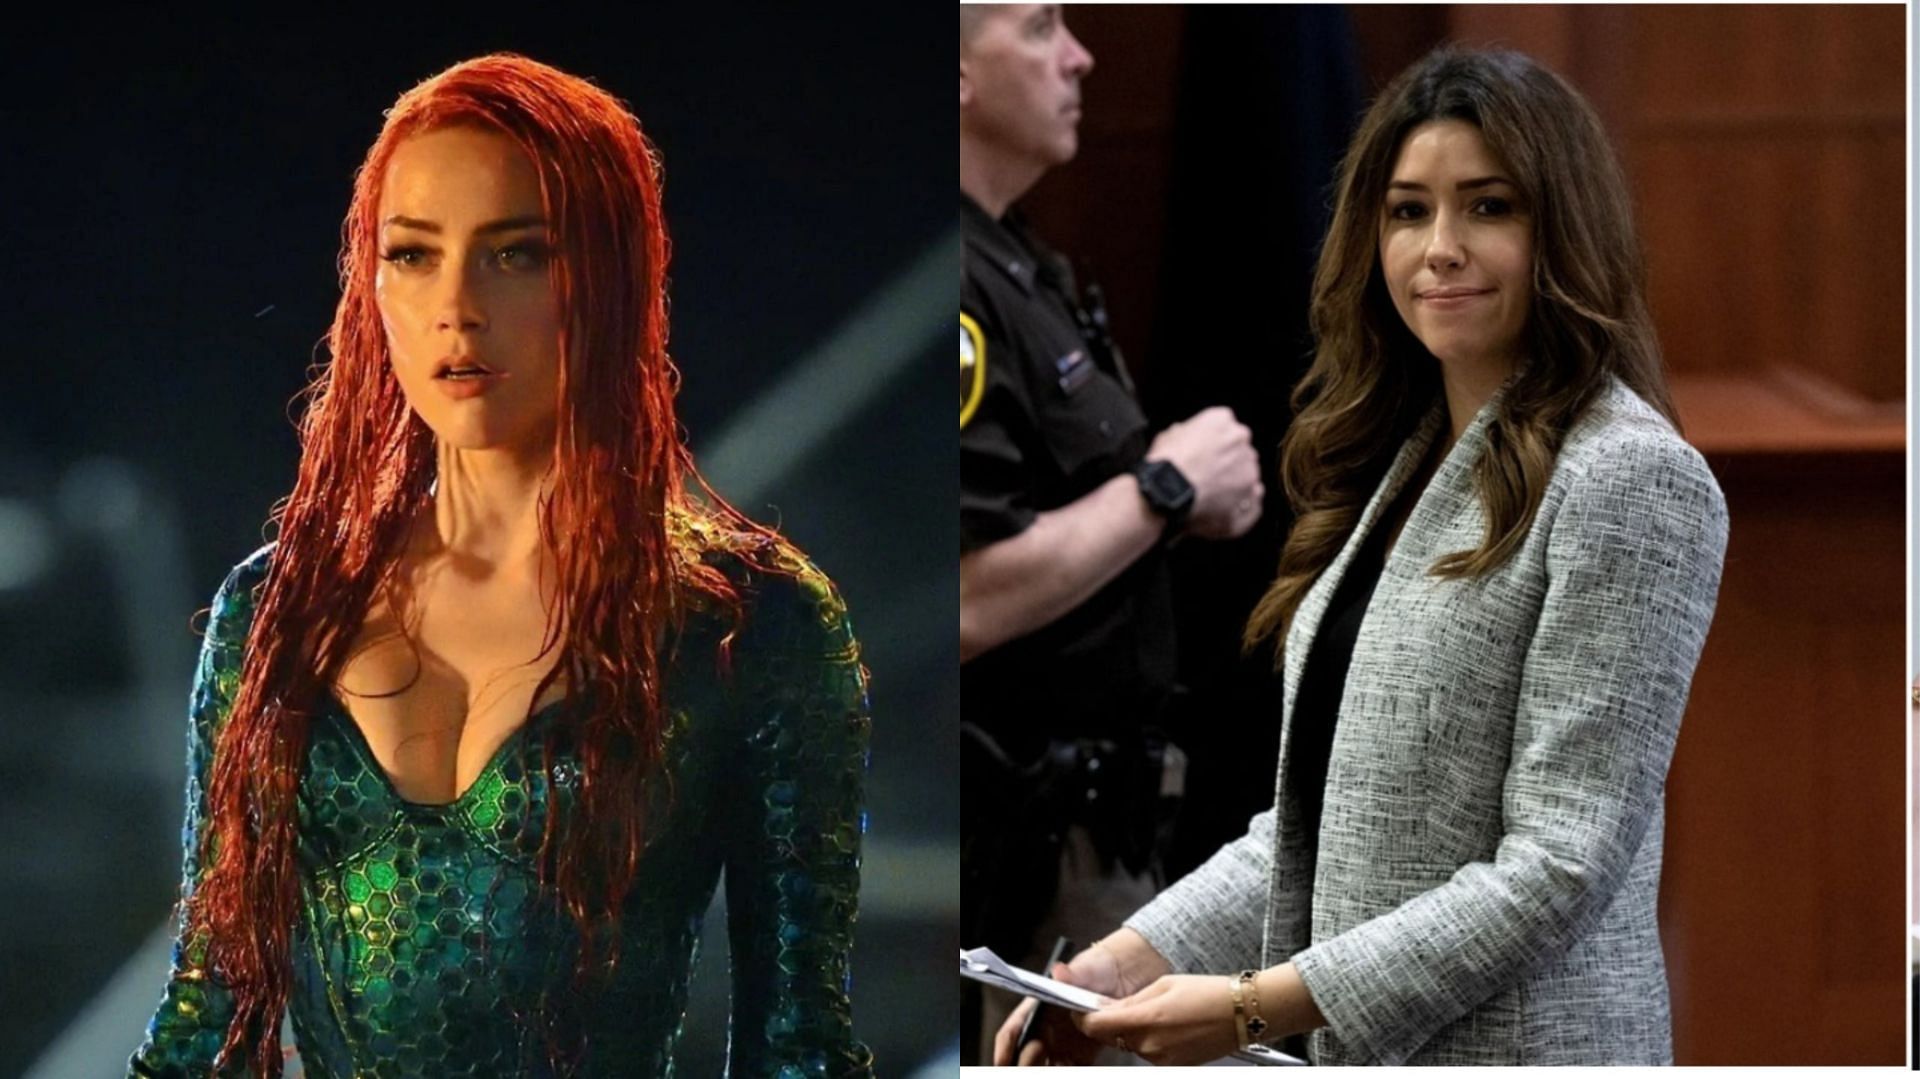 Amber Heard as Mera, and Camille Vasquez in the trial (Image via Warner Bros. Discovery, and Brendan Smialowski/Pool/AFP/Getty Images)